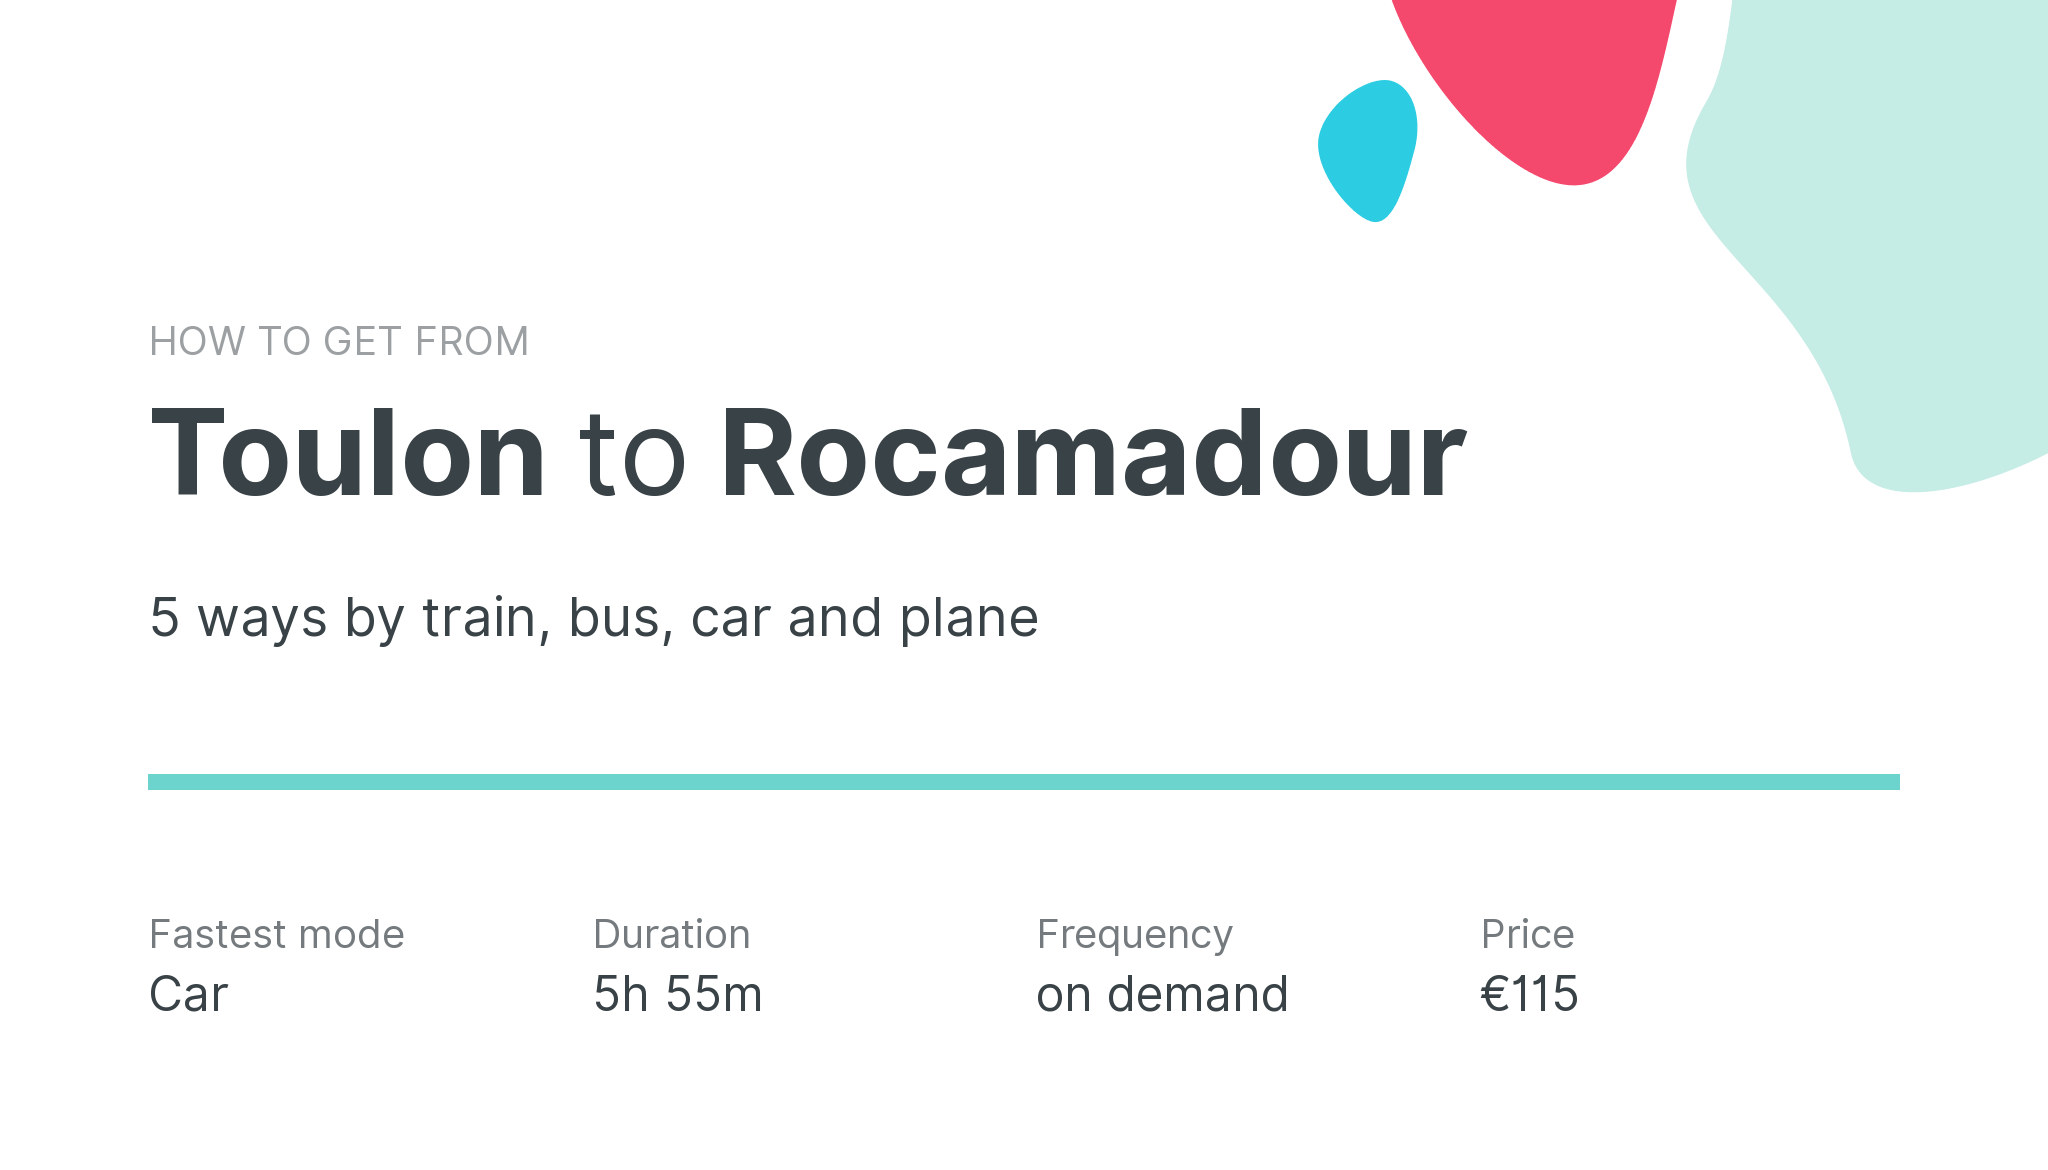 How do I get from Toulon to Rocamadour